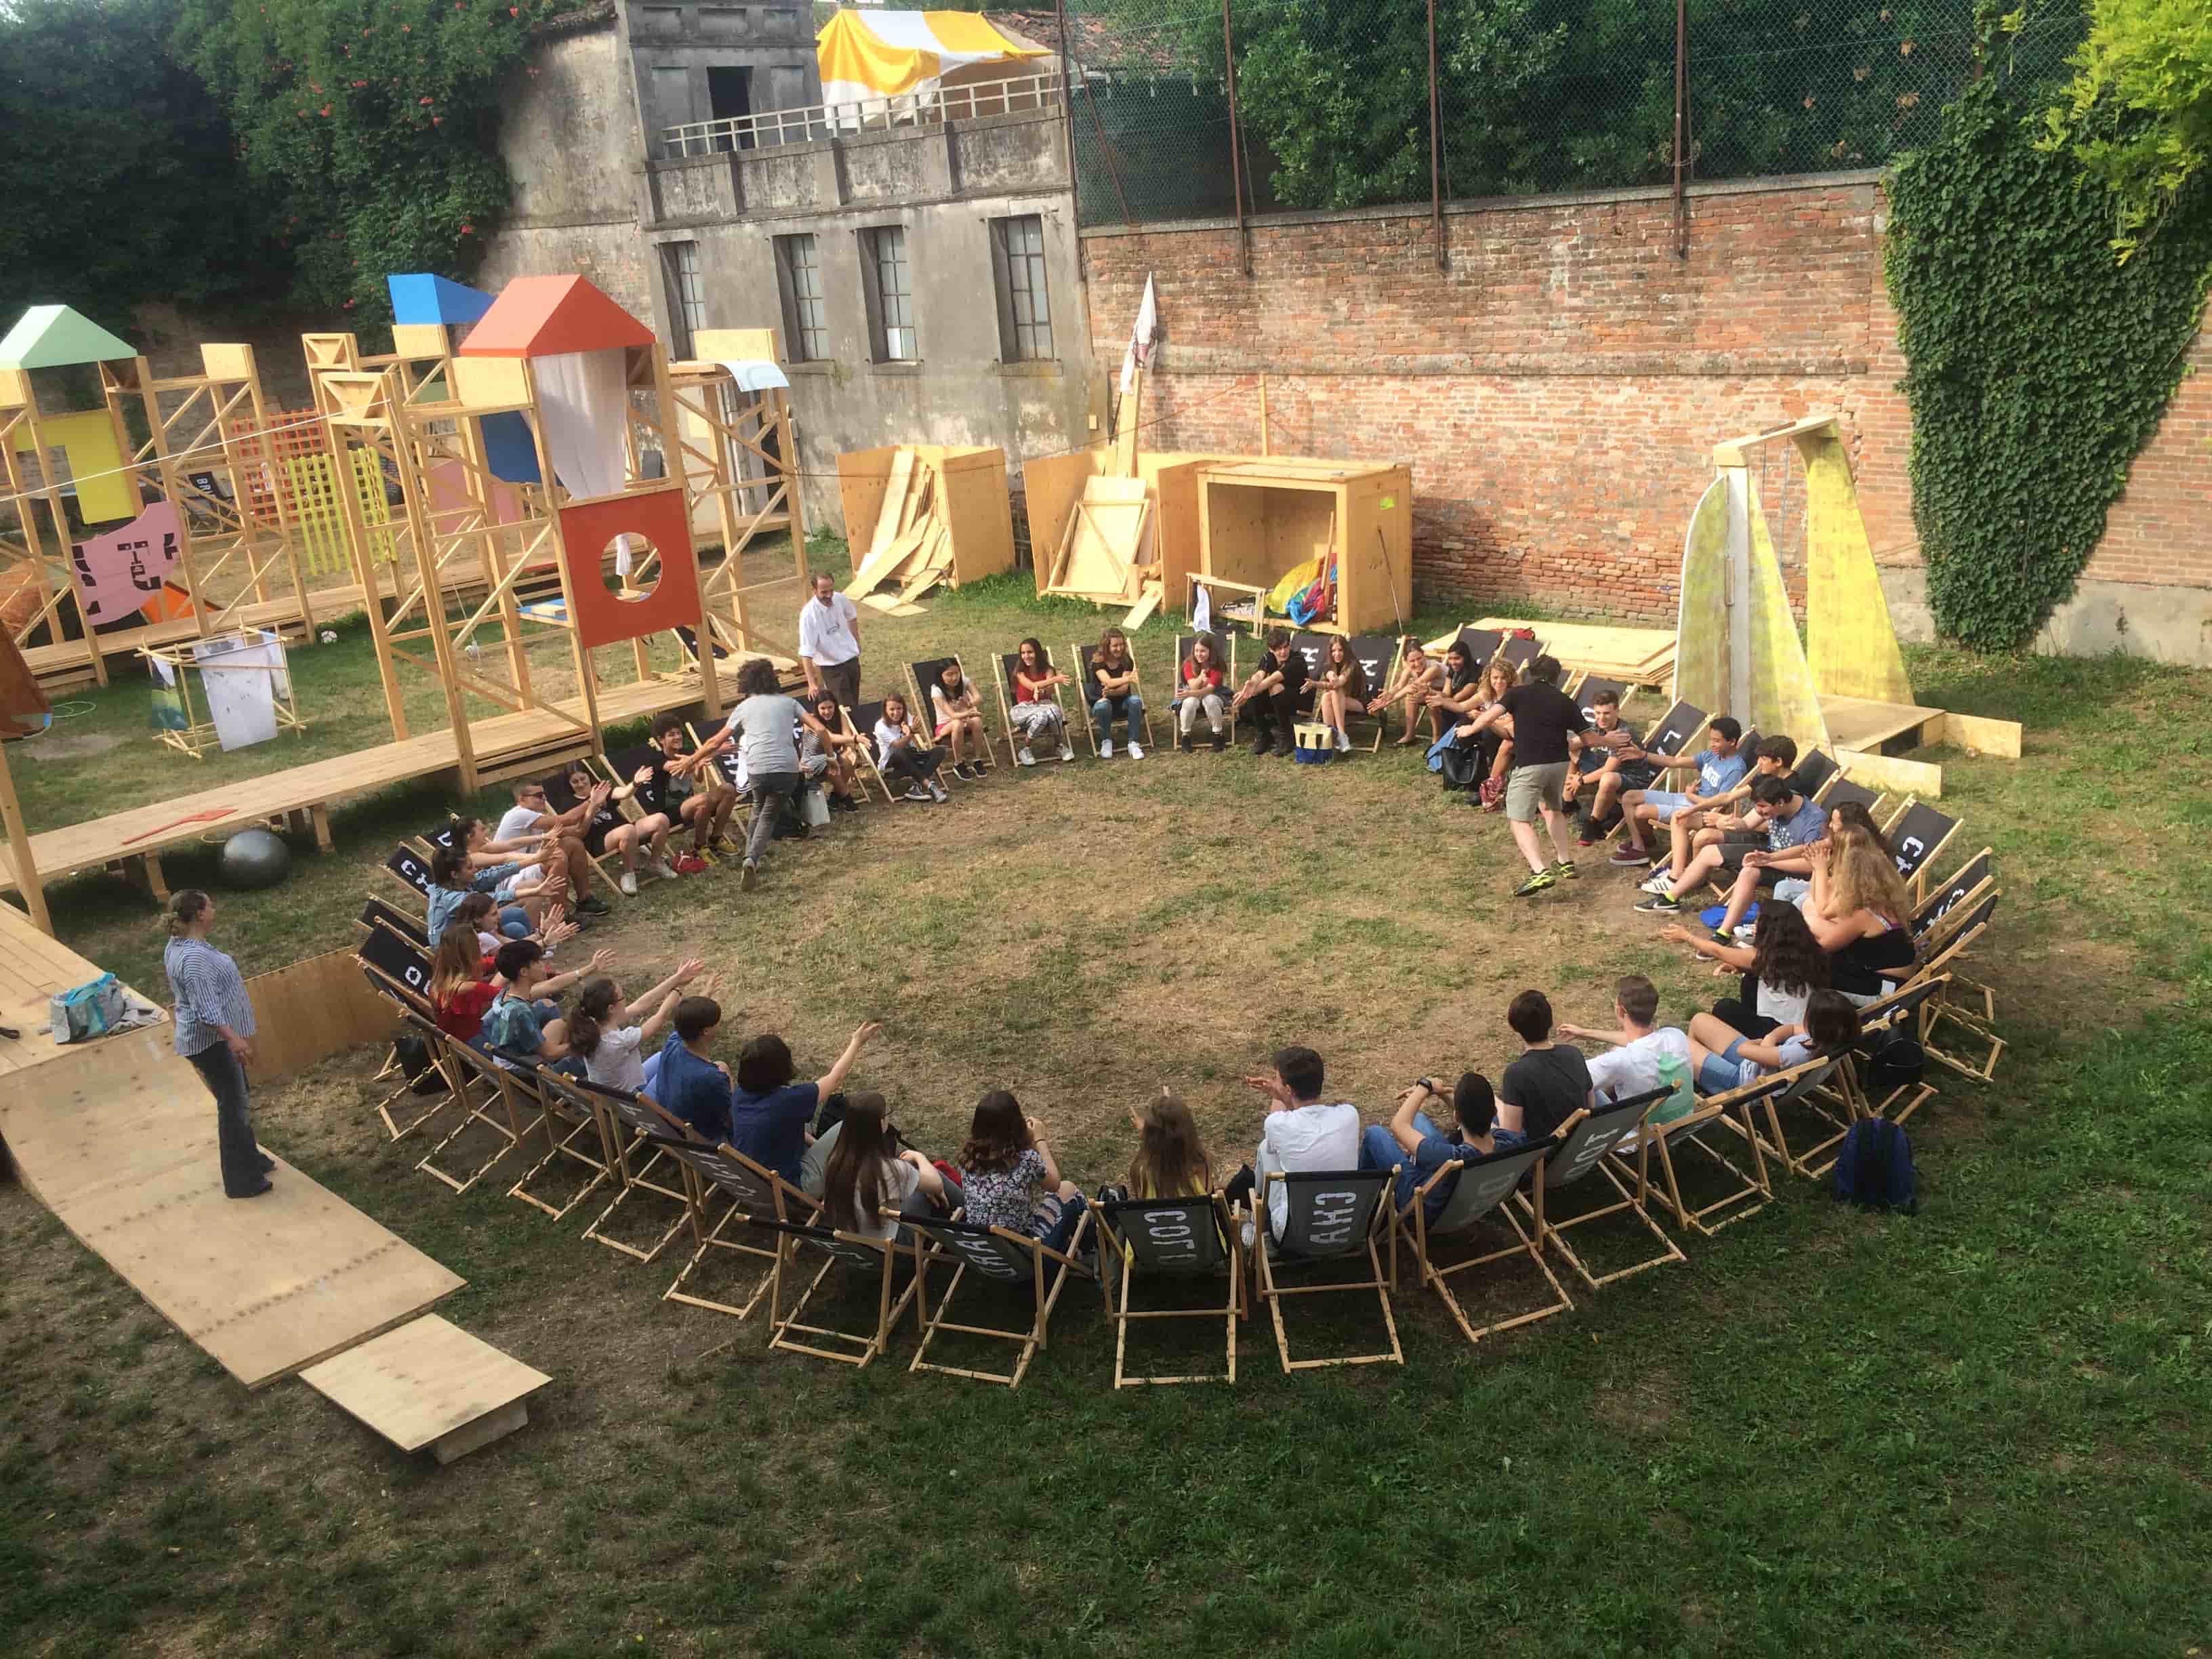 About 40 people are sitting in deckchairs in a circle and playing a game in The Happenstance’s garden venue.